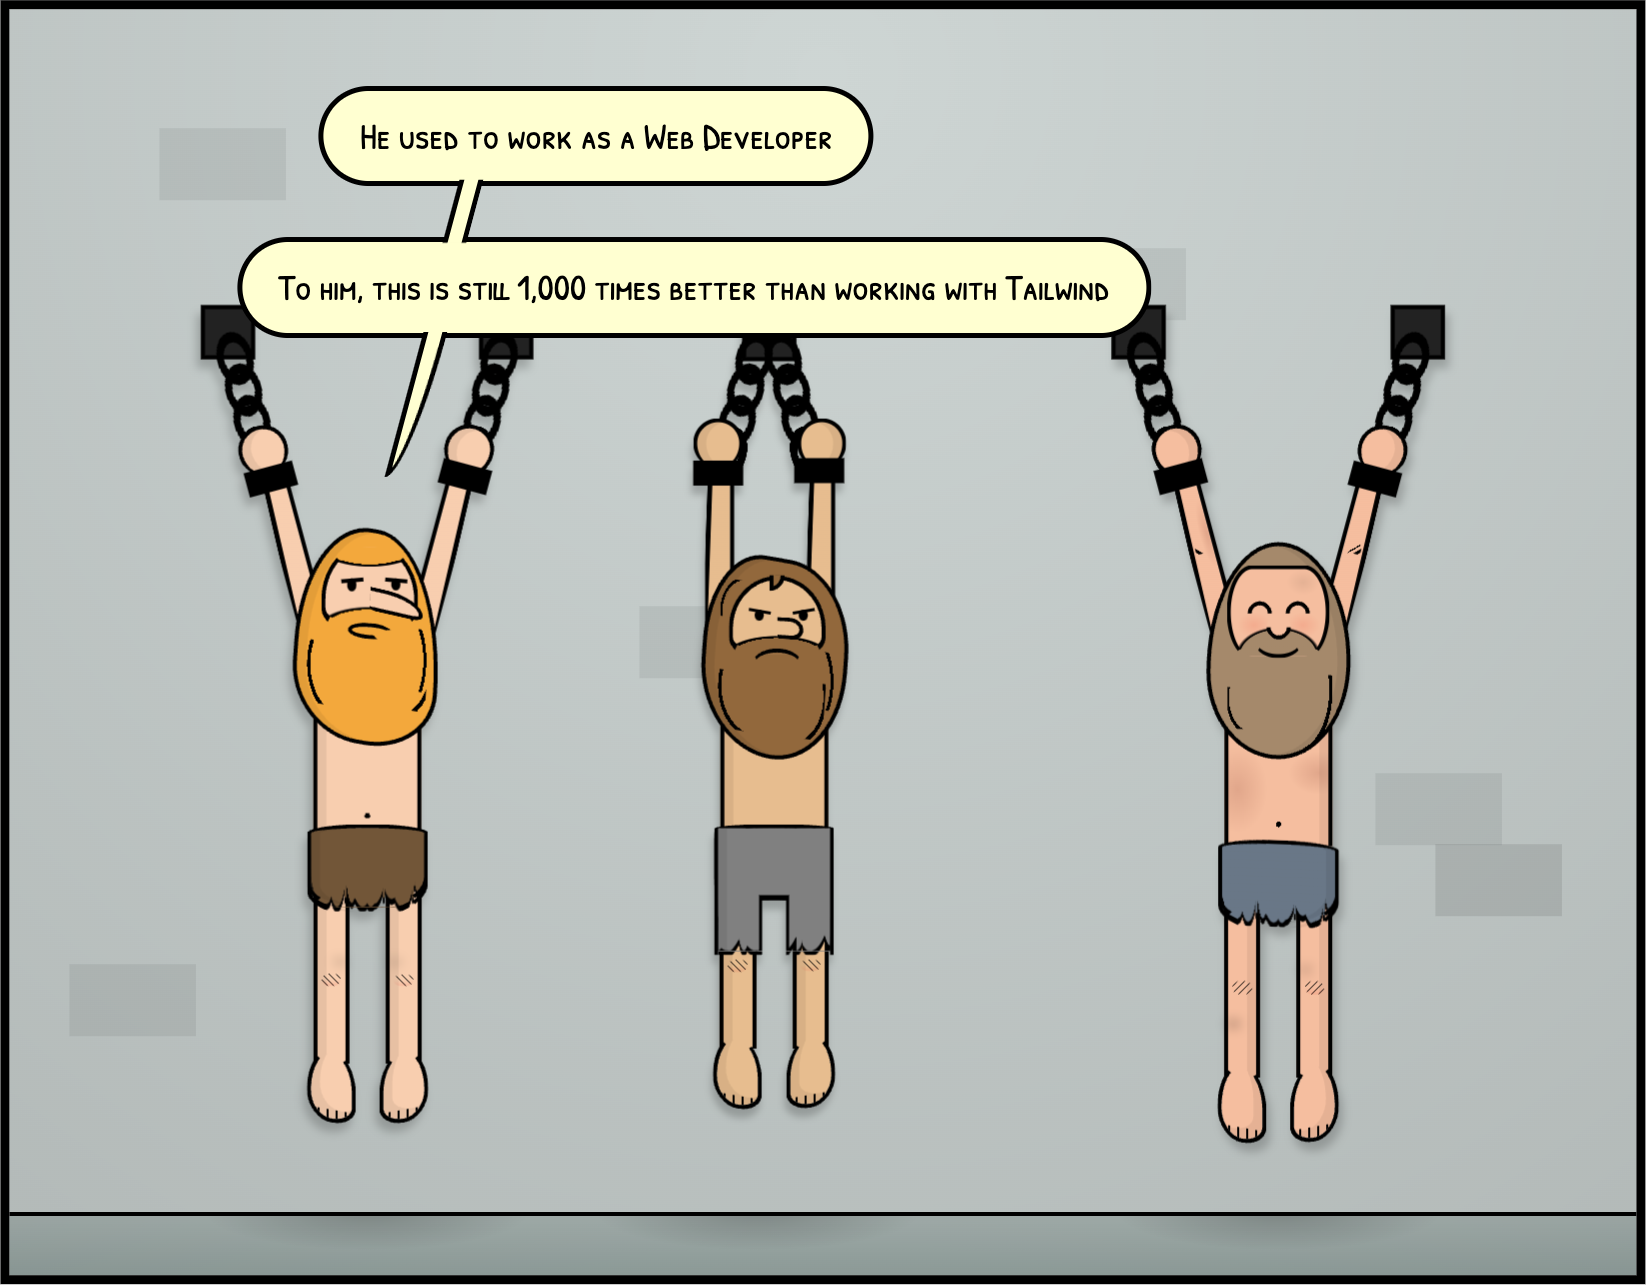 cartoon with three men hang chained in a dungeon. Two look sad, one looks happy. One of the sad ones says 'he used to be a web developer. he says this is 1,000 times better than dealing with Tailwind'